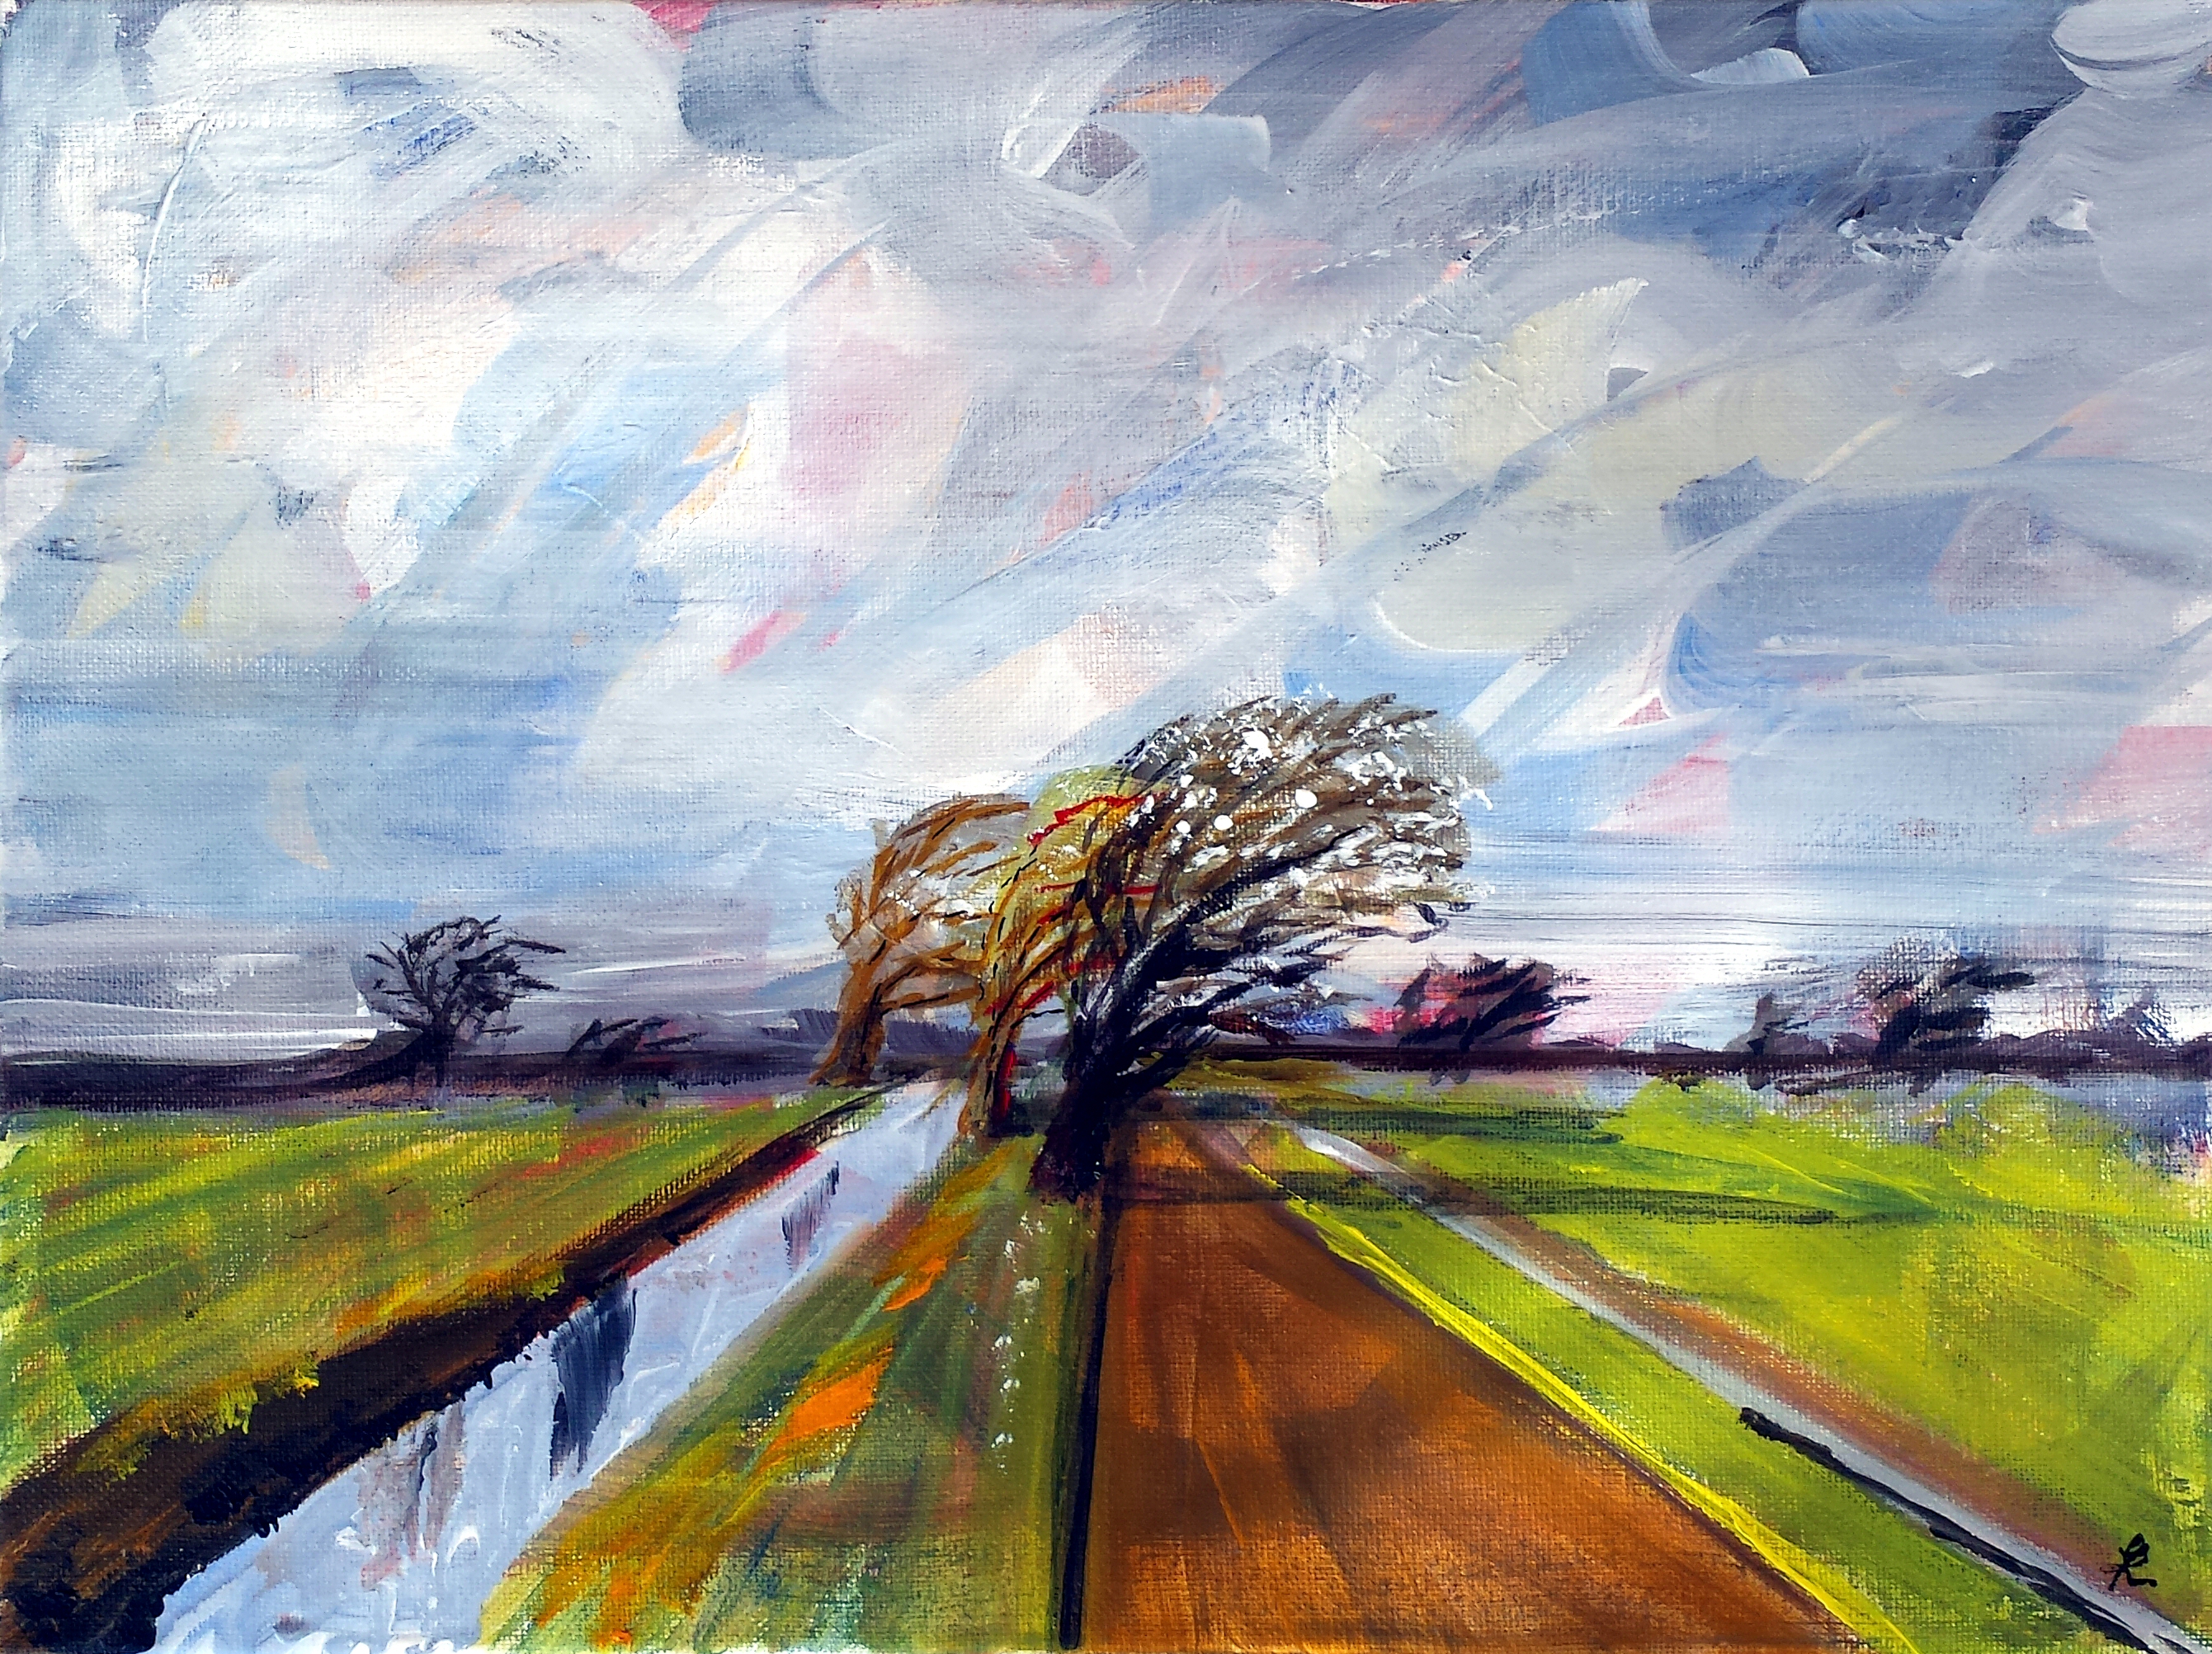 Wind shapes the trees, Somerset levels, no 420 